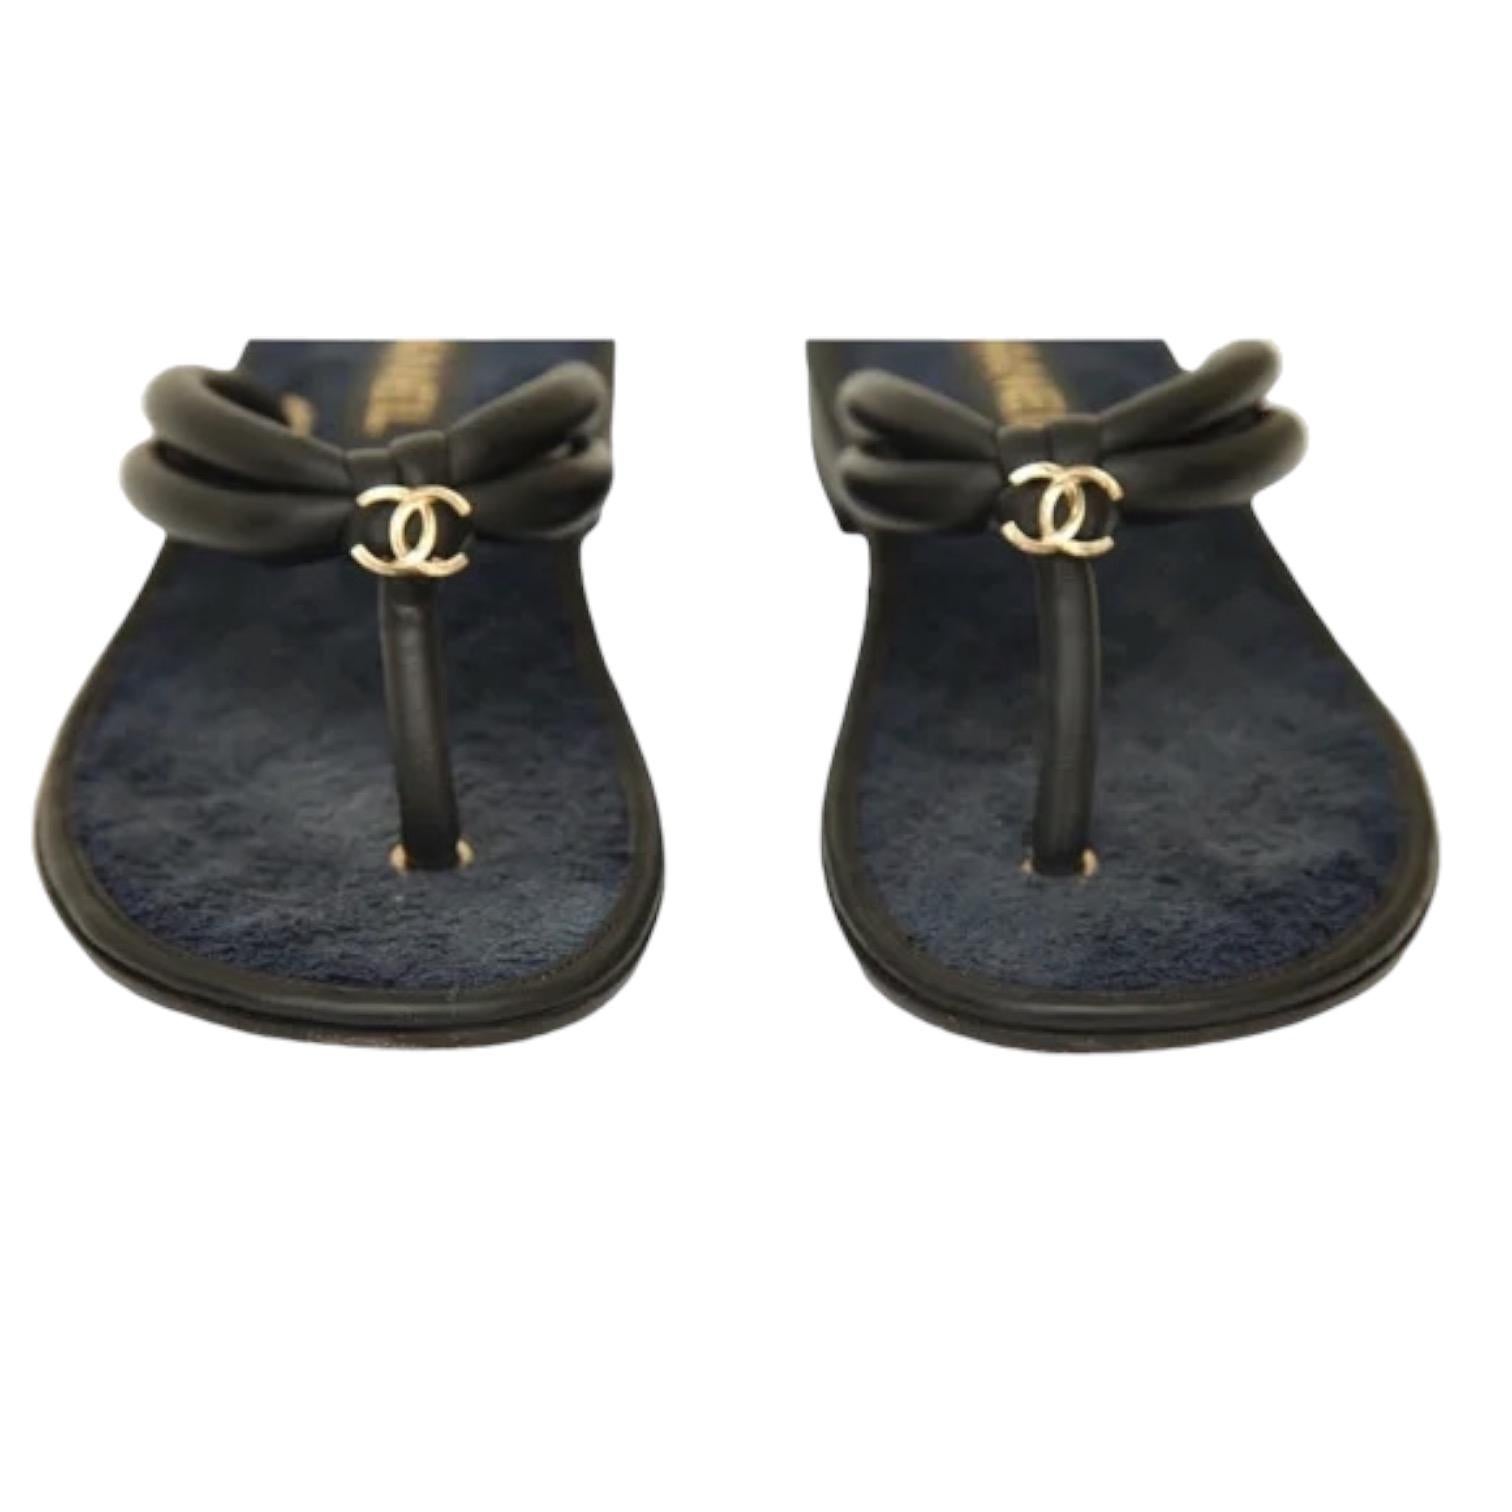 CHANEL Lambskin Leather Slide Thong Sandals Fabric Black Navy Gold CC 38C 2